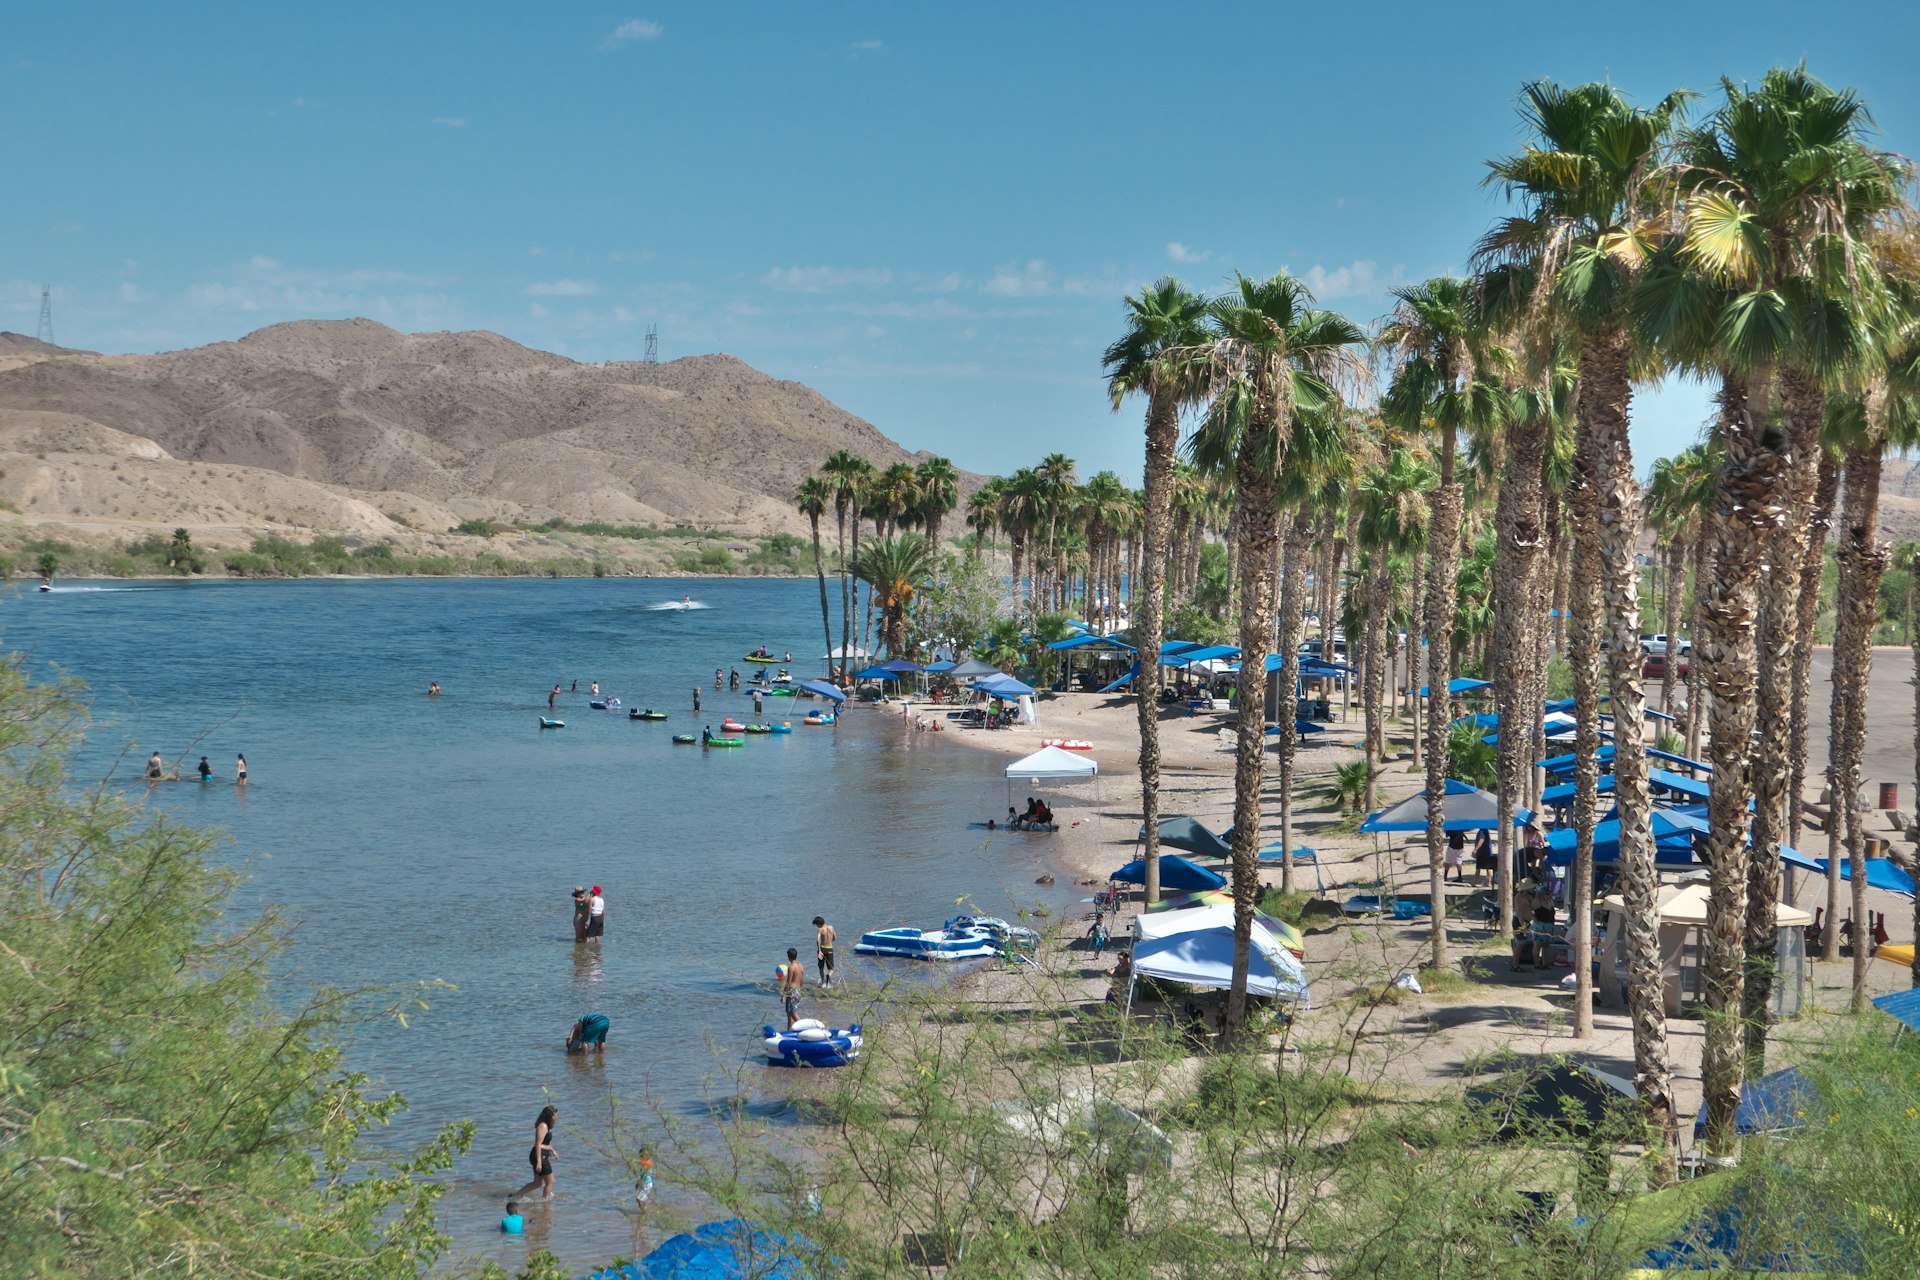 People on Jet Skis and boats at the Colorado River Heritage Greenway Park, Laughlin, Nevada, USA